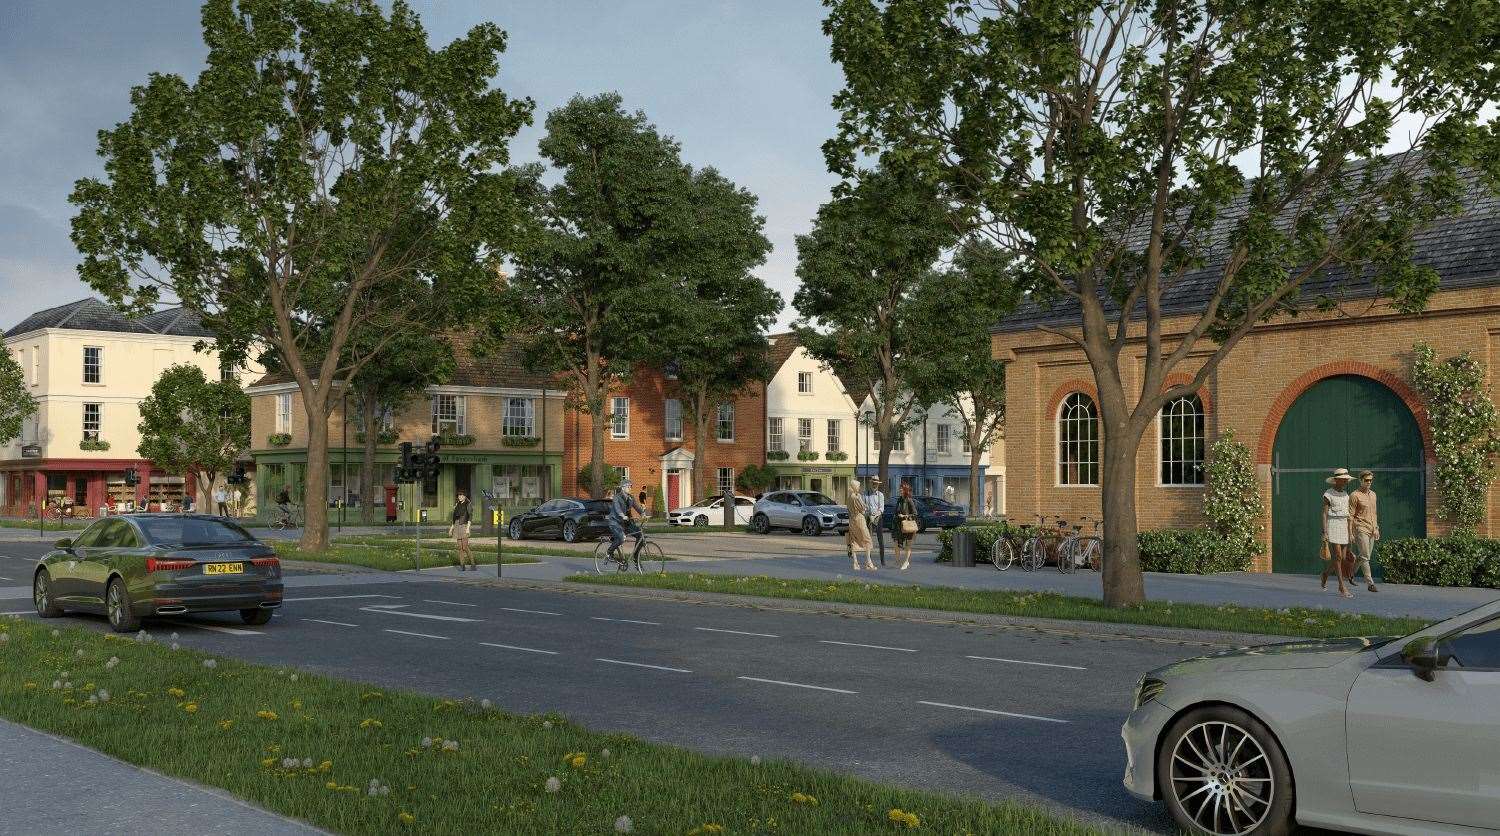 What the South East Faversham neighbourhood could look like. Picture: Duchy of Cornwall